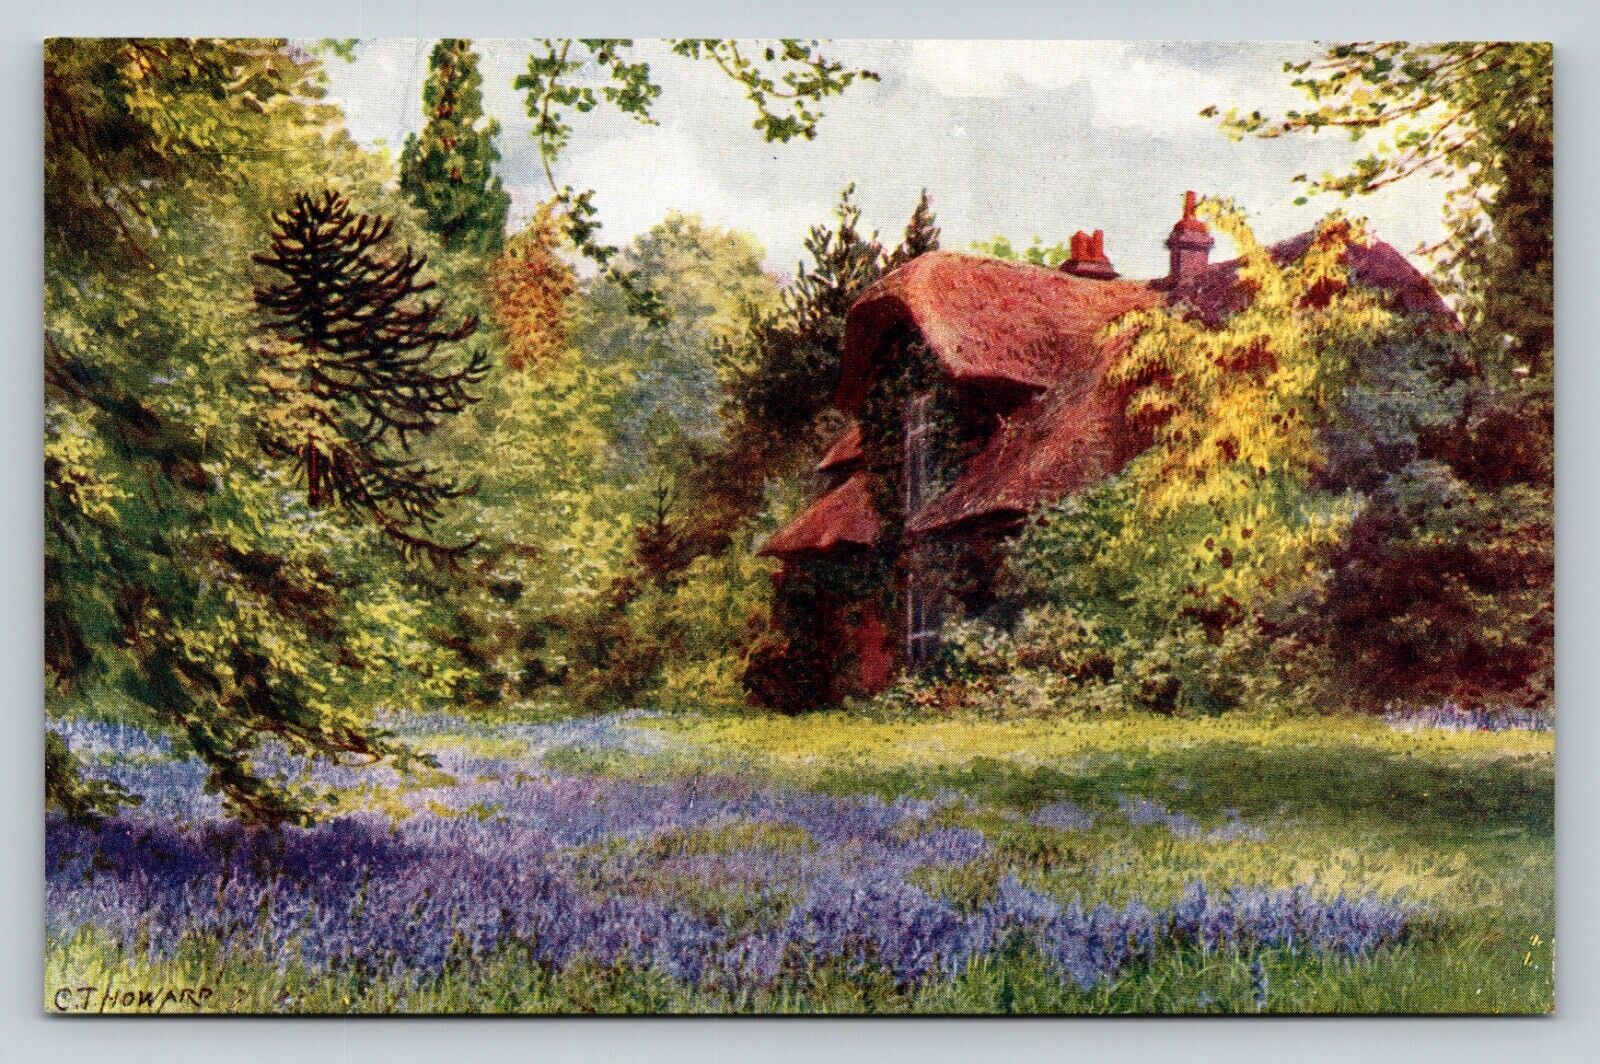 1998 Queen\'s Cottage Kew Gardens From A Drawing By C.T. Howard VINTAGE Postcard